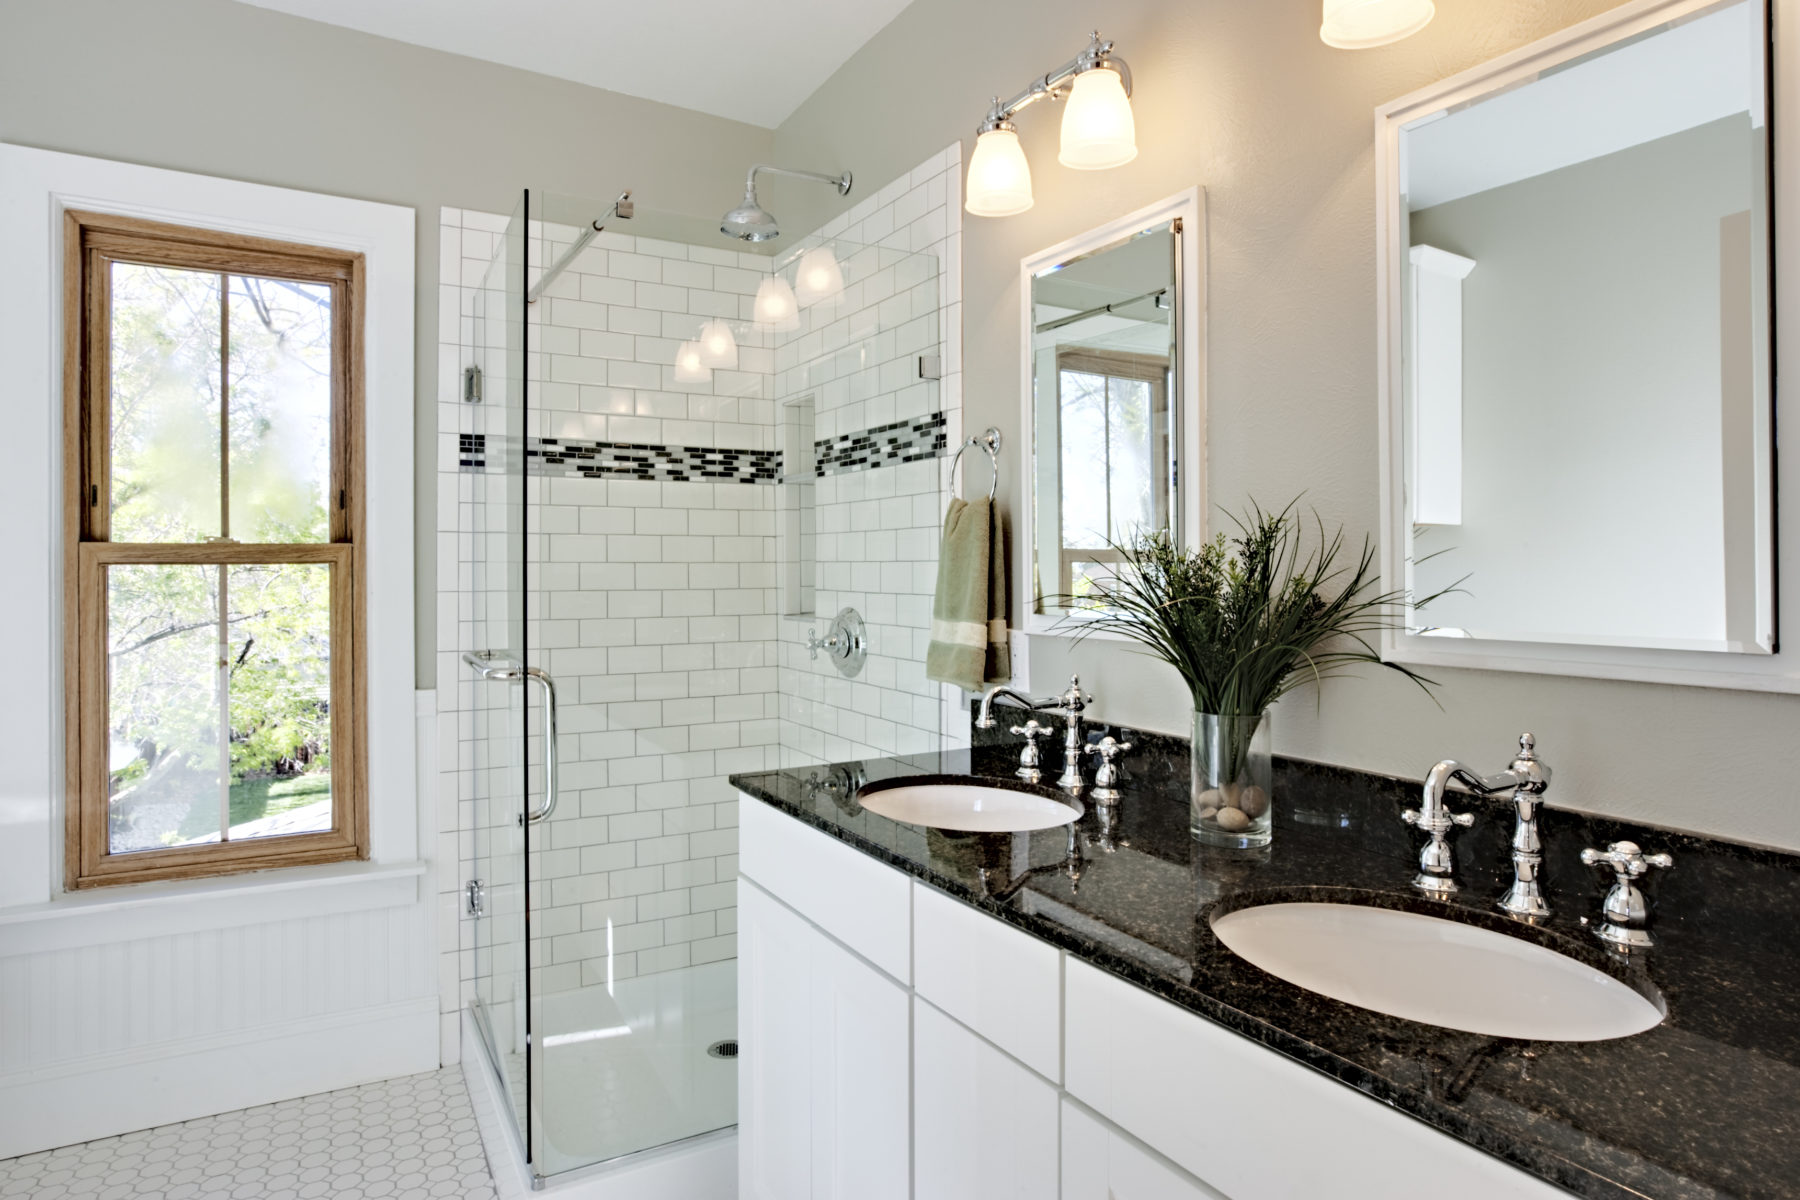 2 Key Considerations for When You Enlarge a Shower -